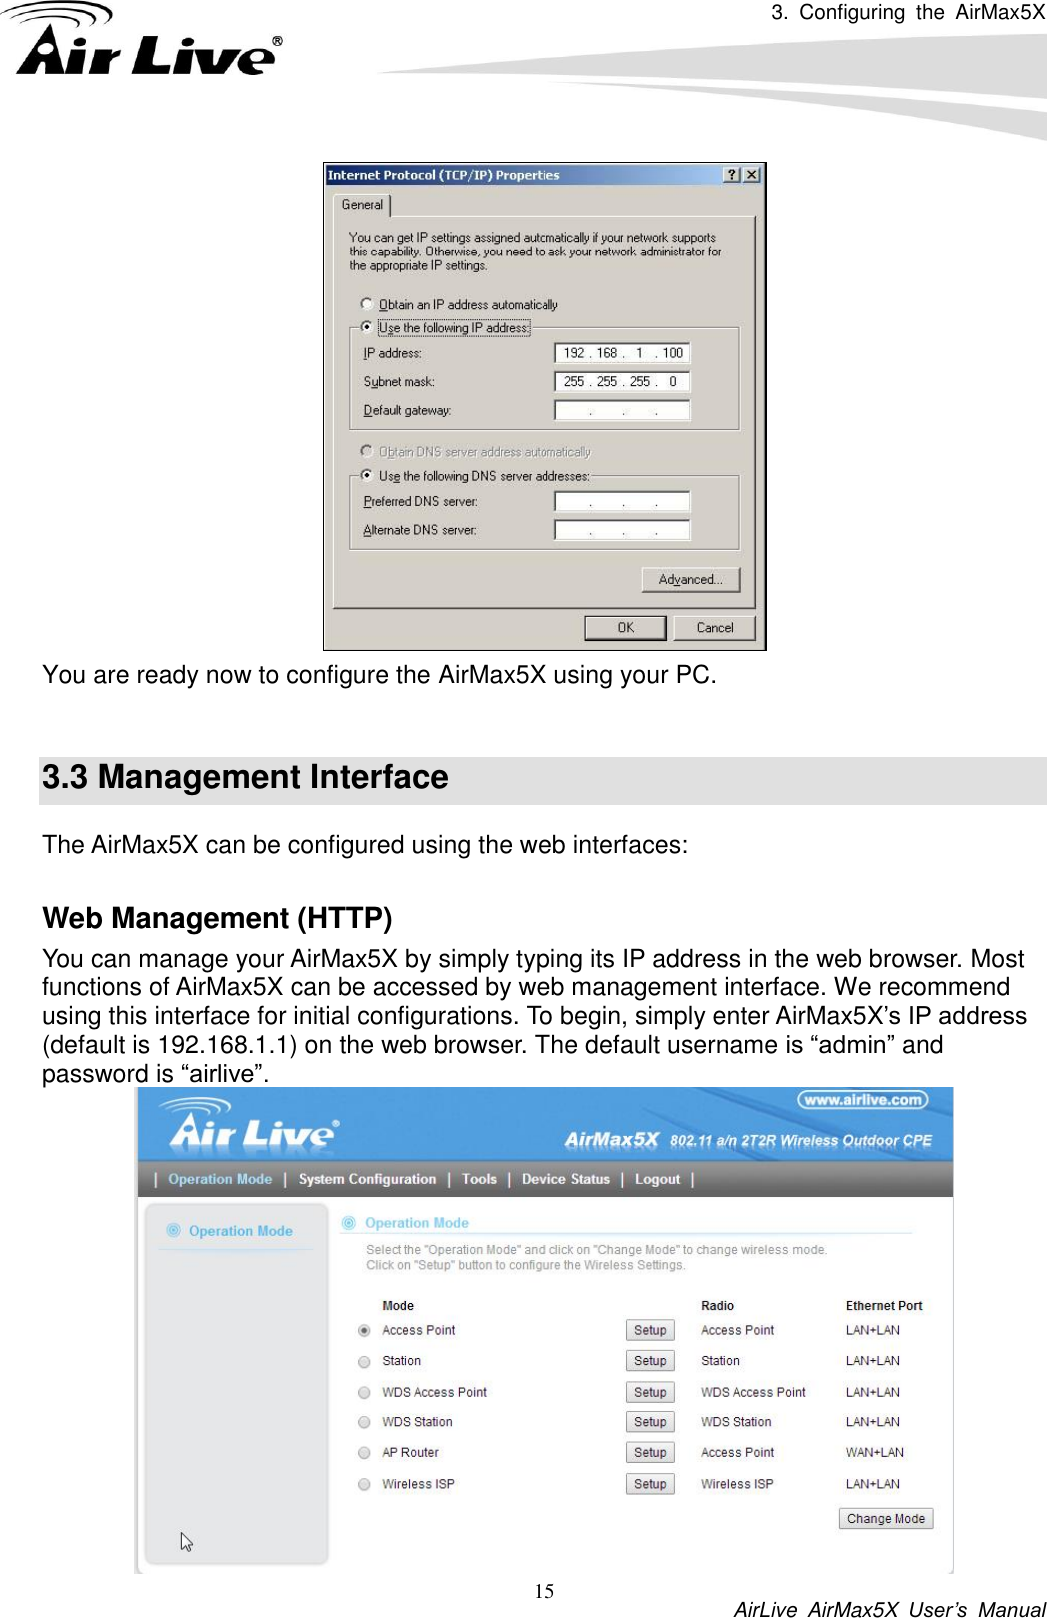 3.  Configuring  the  AirMax5X           AirLive  AirMax5X  User’s  Manual 15  You are ready now to configure the AirMax5X using your PC.    3.3 Management Interface The AirMax5X can be configured using the web interfaces:  Web Management (HTTP) You can manage your AirMax5X by simply typing its IP address in the web browser. Most functions of AirMax5X can be accessed by web management interface. We recommend using this interface for initial configurations. To begin, simply enter AirMax5X’s IP address (default is 192.168.1.1) on the web browser. The default username is “admin” and password is “airlive”.  